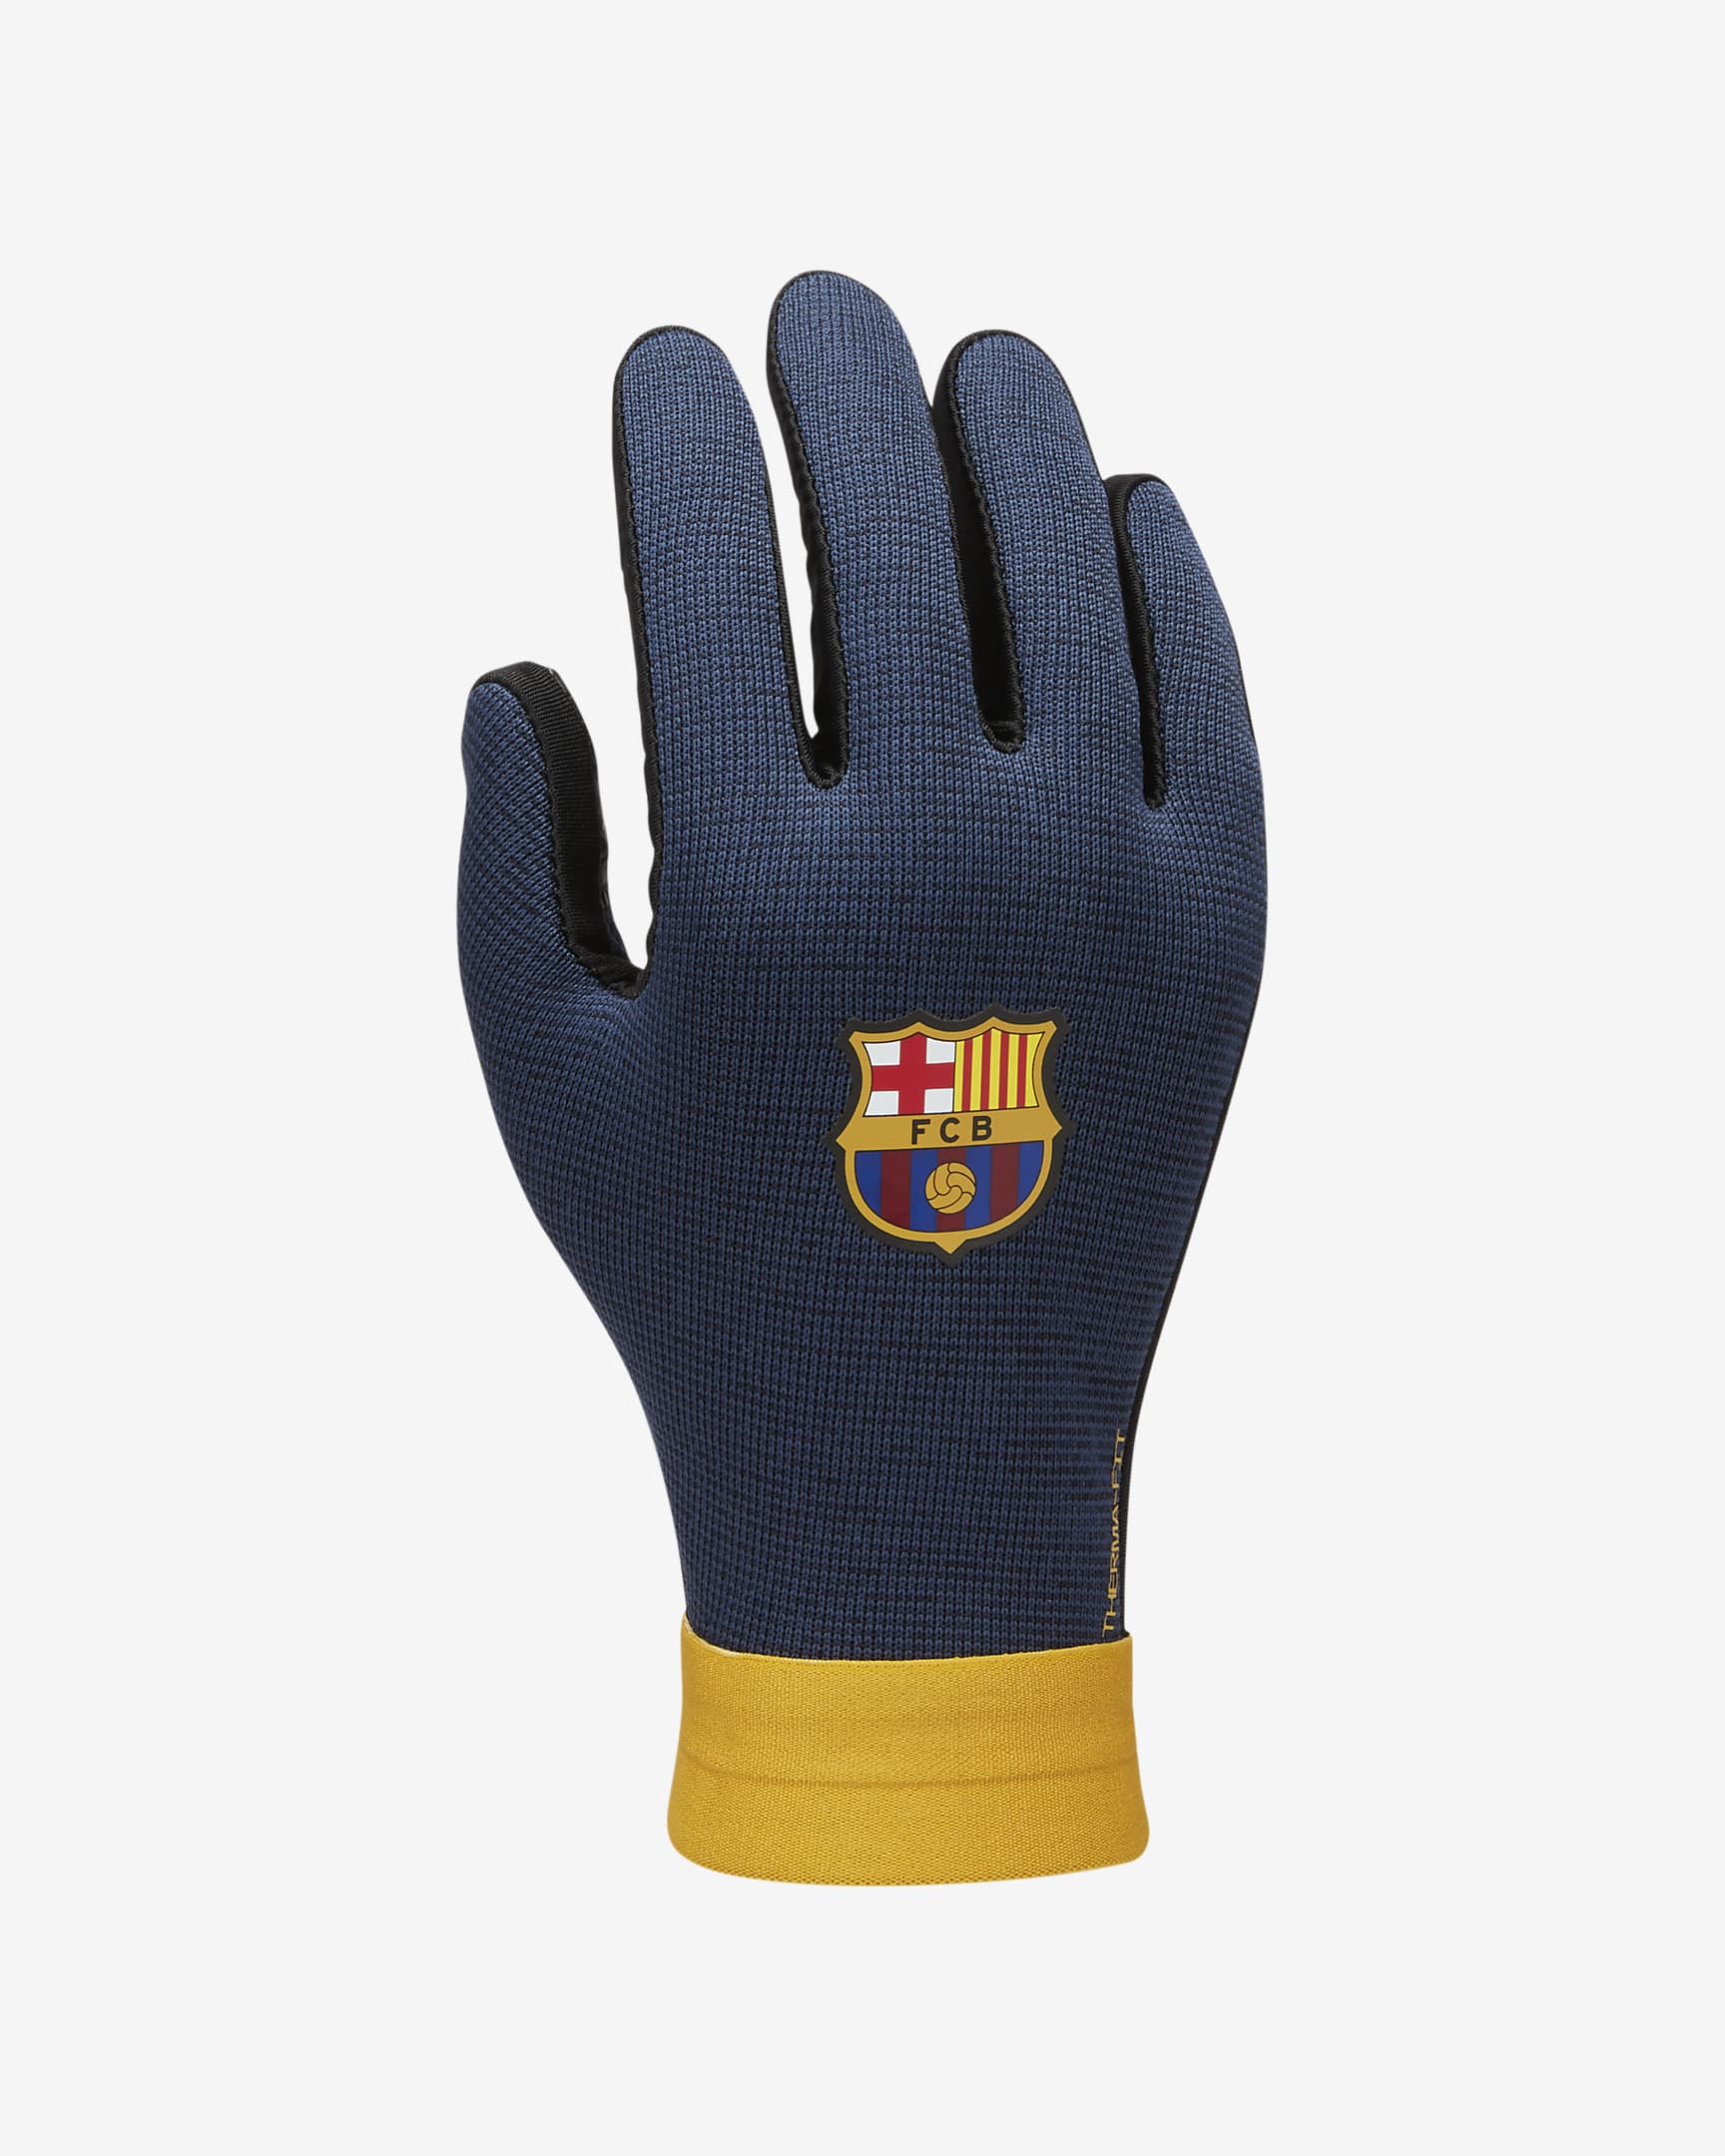 F.C. Barcelona Academy Kids' Nike Therma-FIT Football Gloves - Black/Midnight Navy/Chrome Yellow